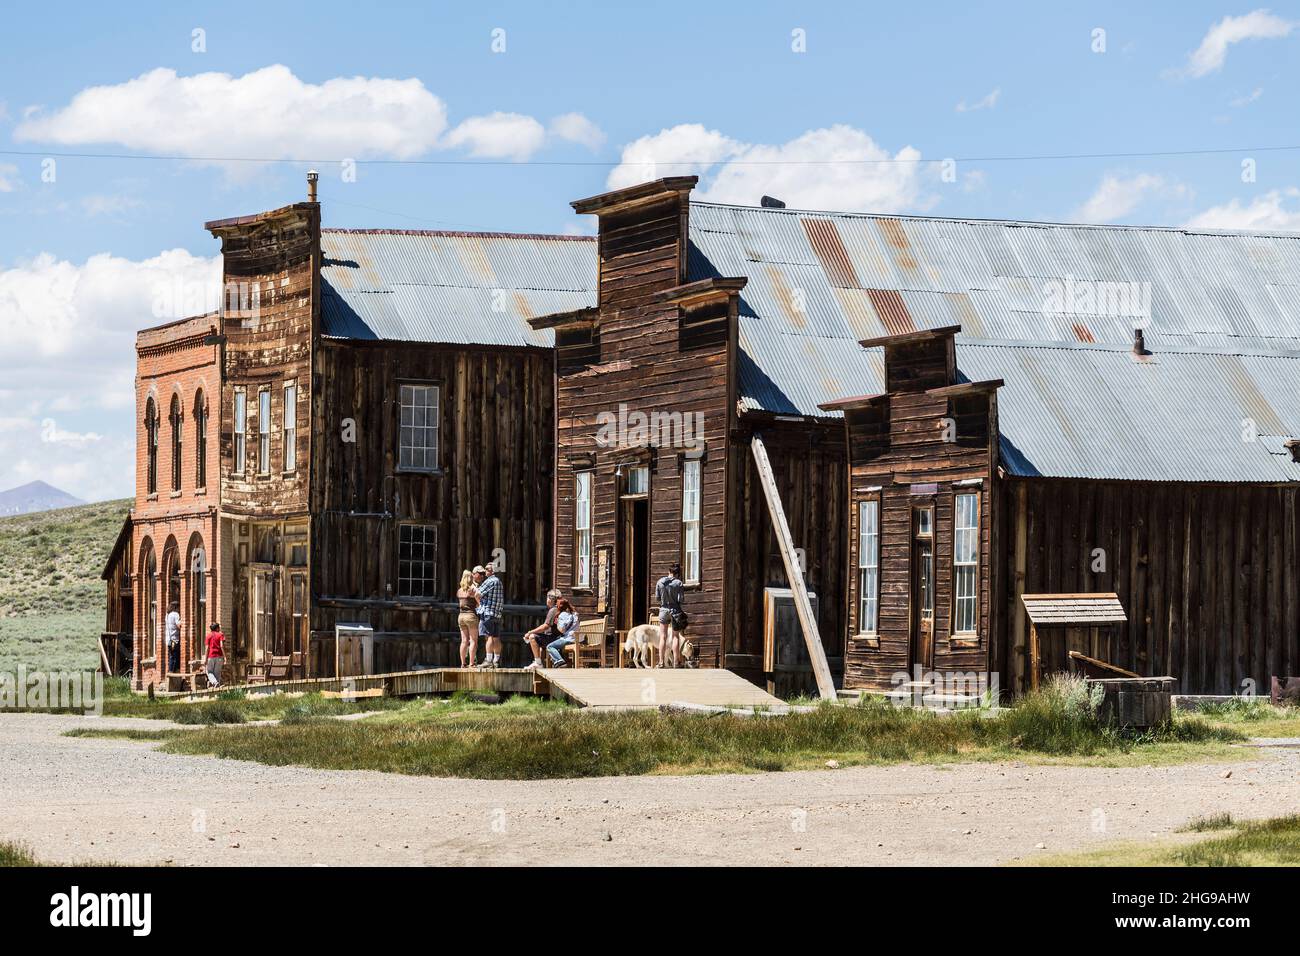 Bodie, California, USA - July 6, 2015:  Summer tourists inspect historic structures at California's Bodie State Historic Park. Stock Photo